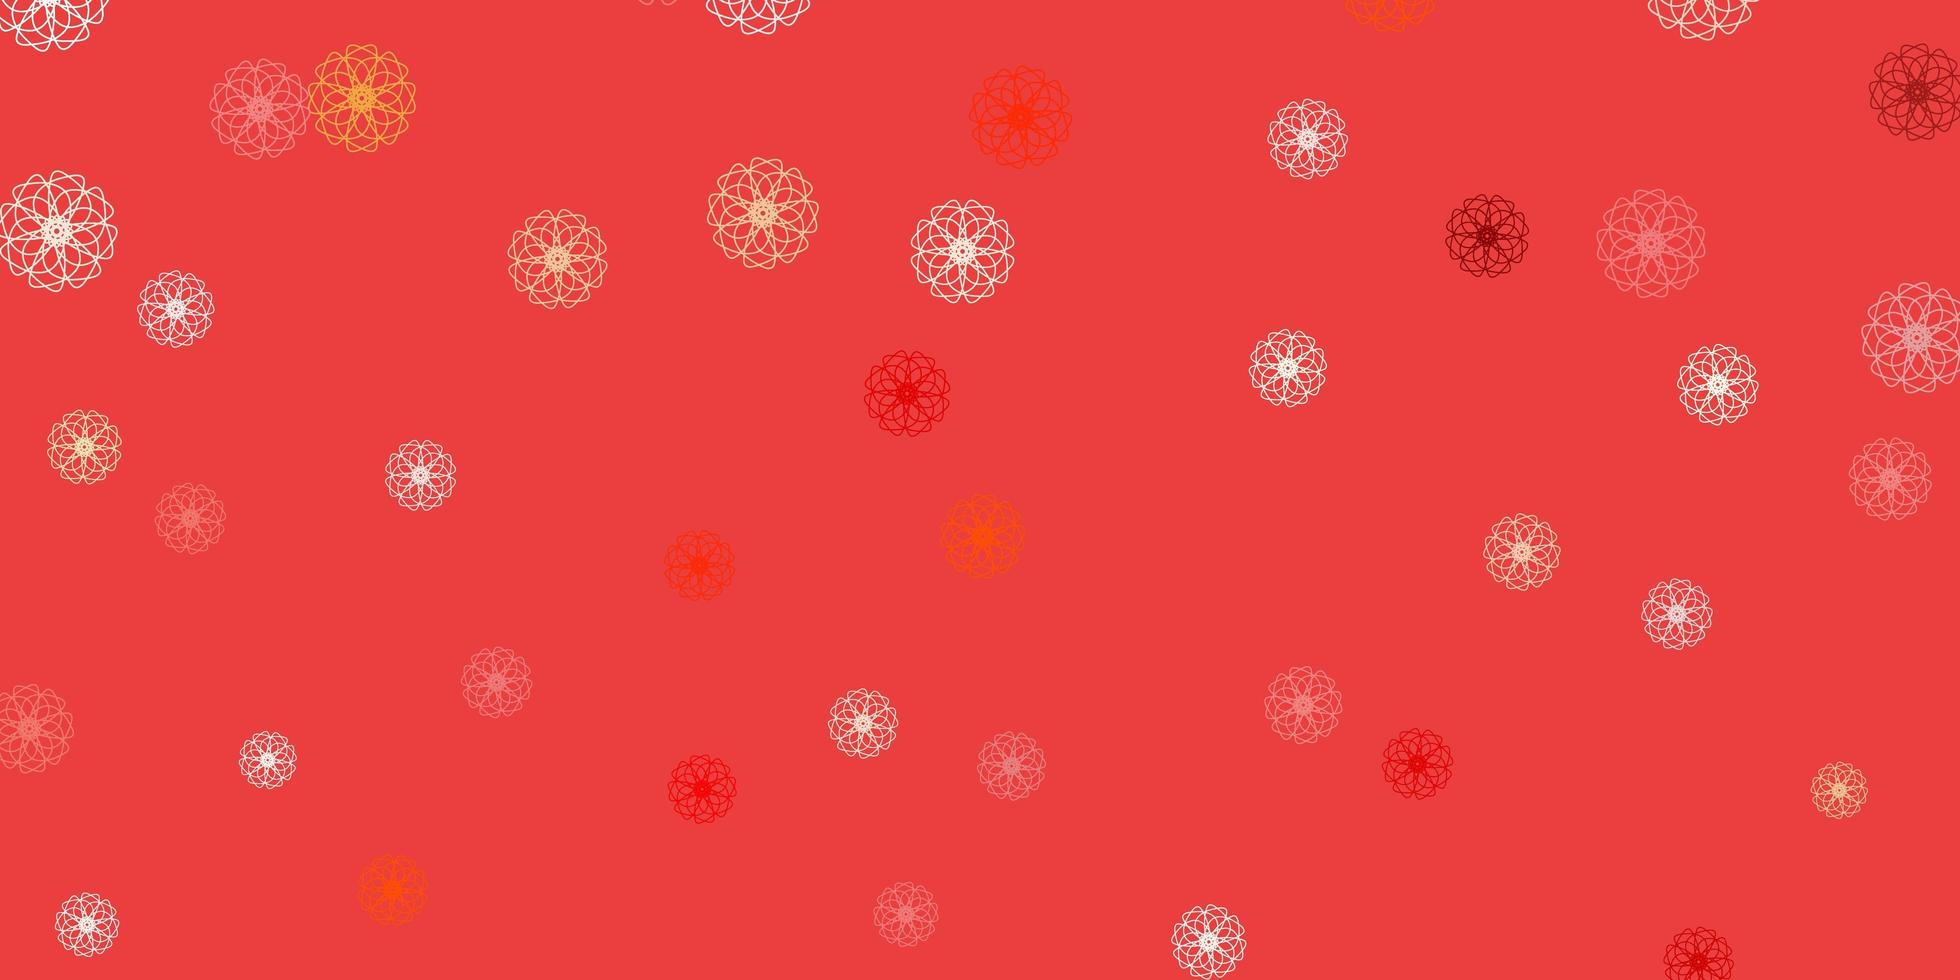 Light red, yellow vector doodle texture with flowers.